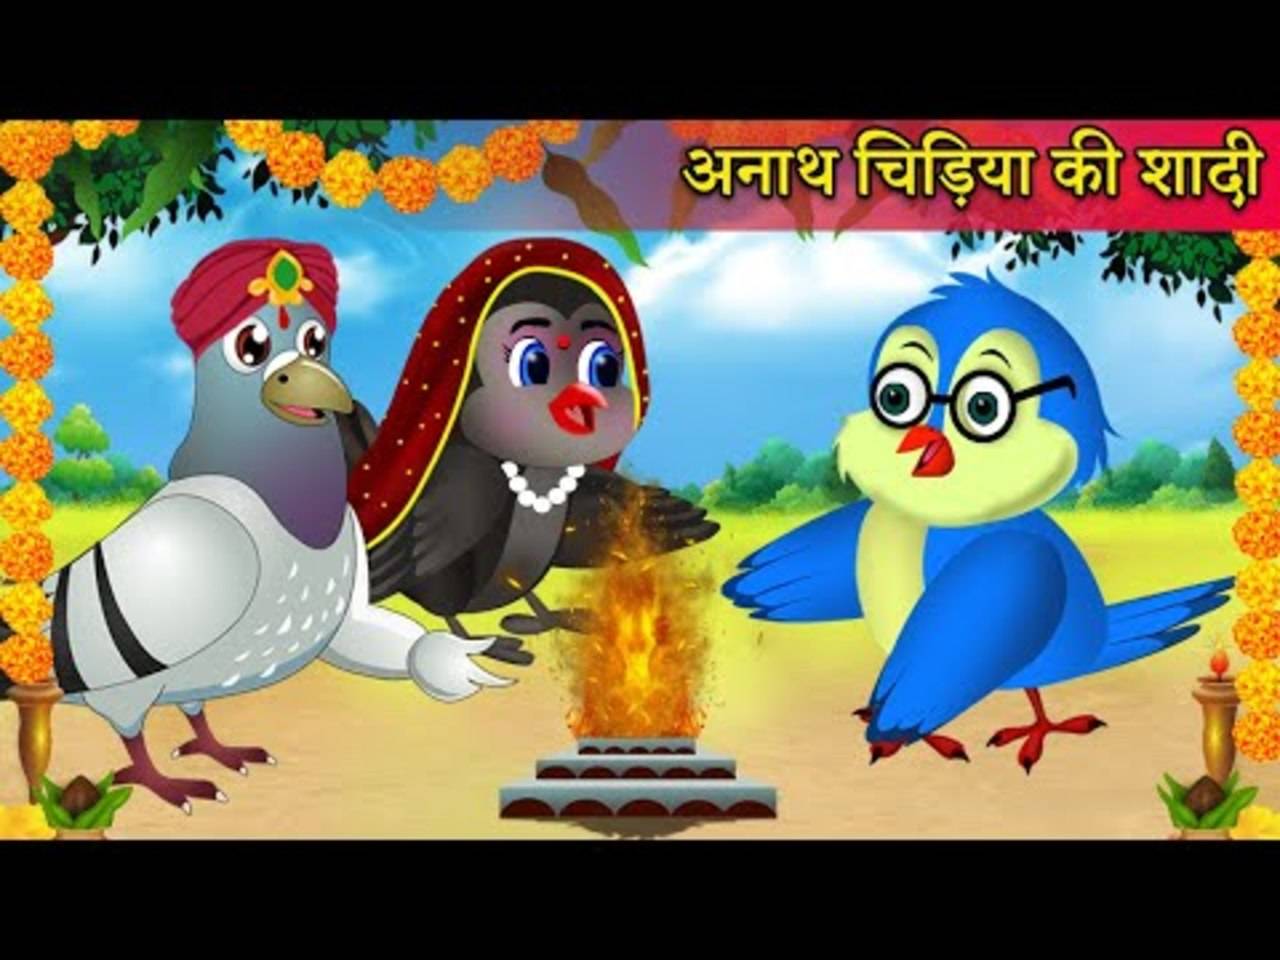 Watch Popular Children Hindi Story 'Anath Chidiya Ki Shadi' For Kids -  Check Out Kids's Nursery Rhymes And Baby Songs In Hindi | Entertainment -  Times of India Videos